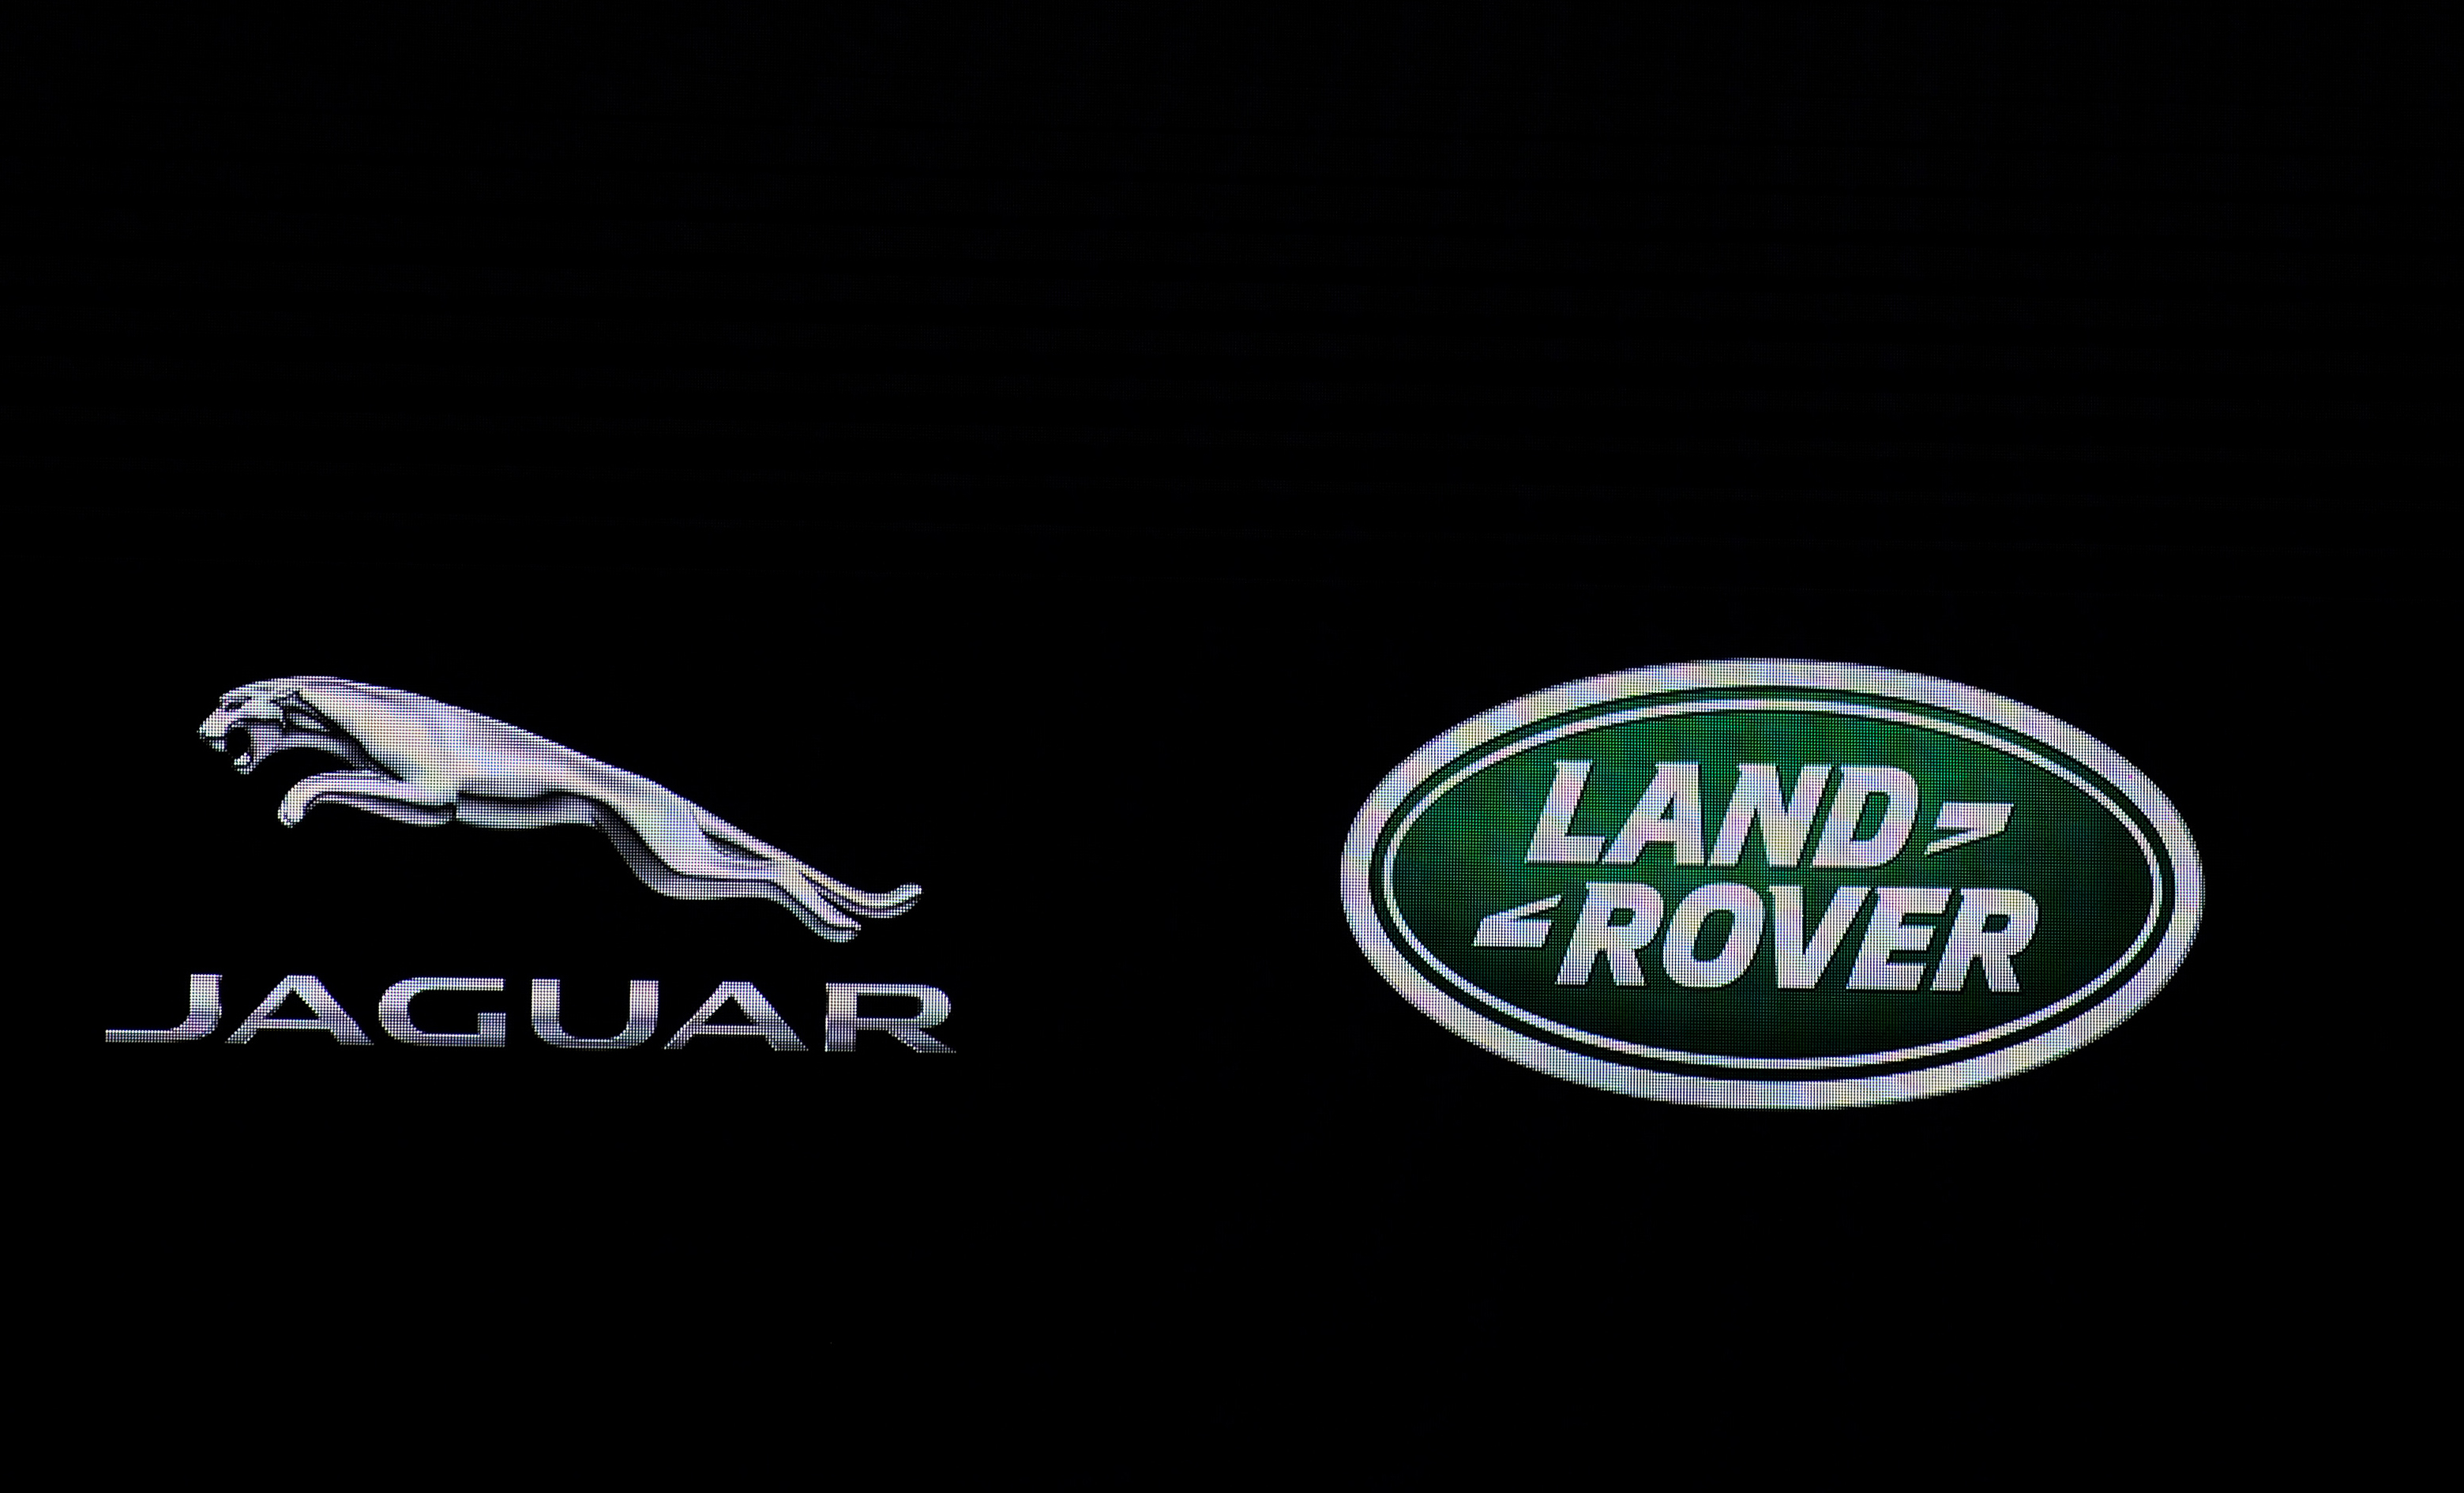 (FILES) This file photo taken on February 3, 2016 shows the Jaguar and Land Rover logo  seen at the Indian Auto Expo 2016 in Greater Noida on the outskirts of New Delhi. Jaguar Land Rover announced TAugust 4, 2016 it is recalling more than 50,000 vehicles in the United States to fix defective Takata airbags.The British luxury carmaker, part of Indian giant Tata Motors, said it has begun sending recall notifications to owners of certain 2009-2011 Jaguar XF vehicles and 2007-2011 Land Rover Range Rover vehicles.  / AFP PHOTO / SAJJAD HUSSAIN